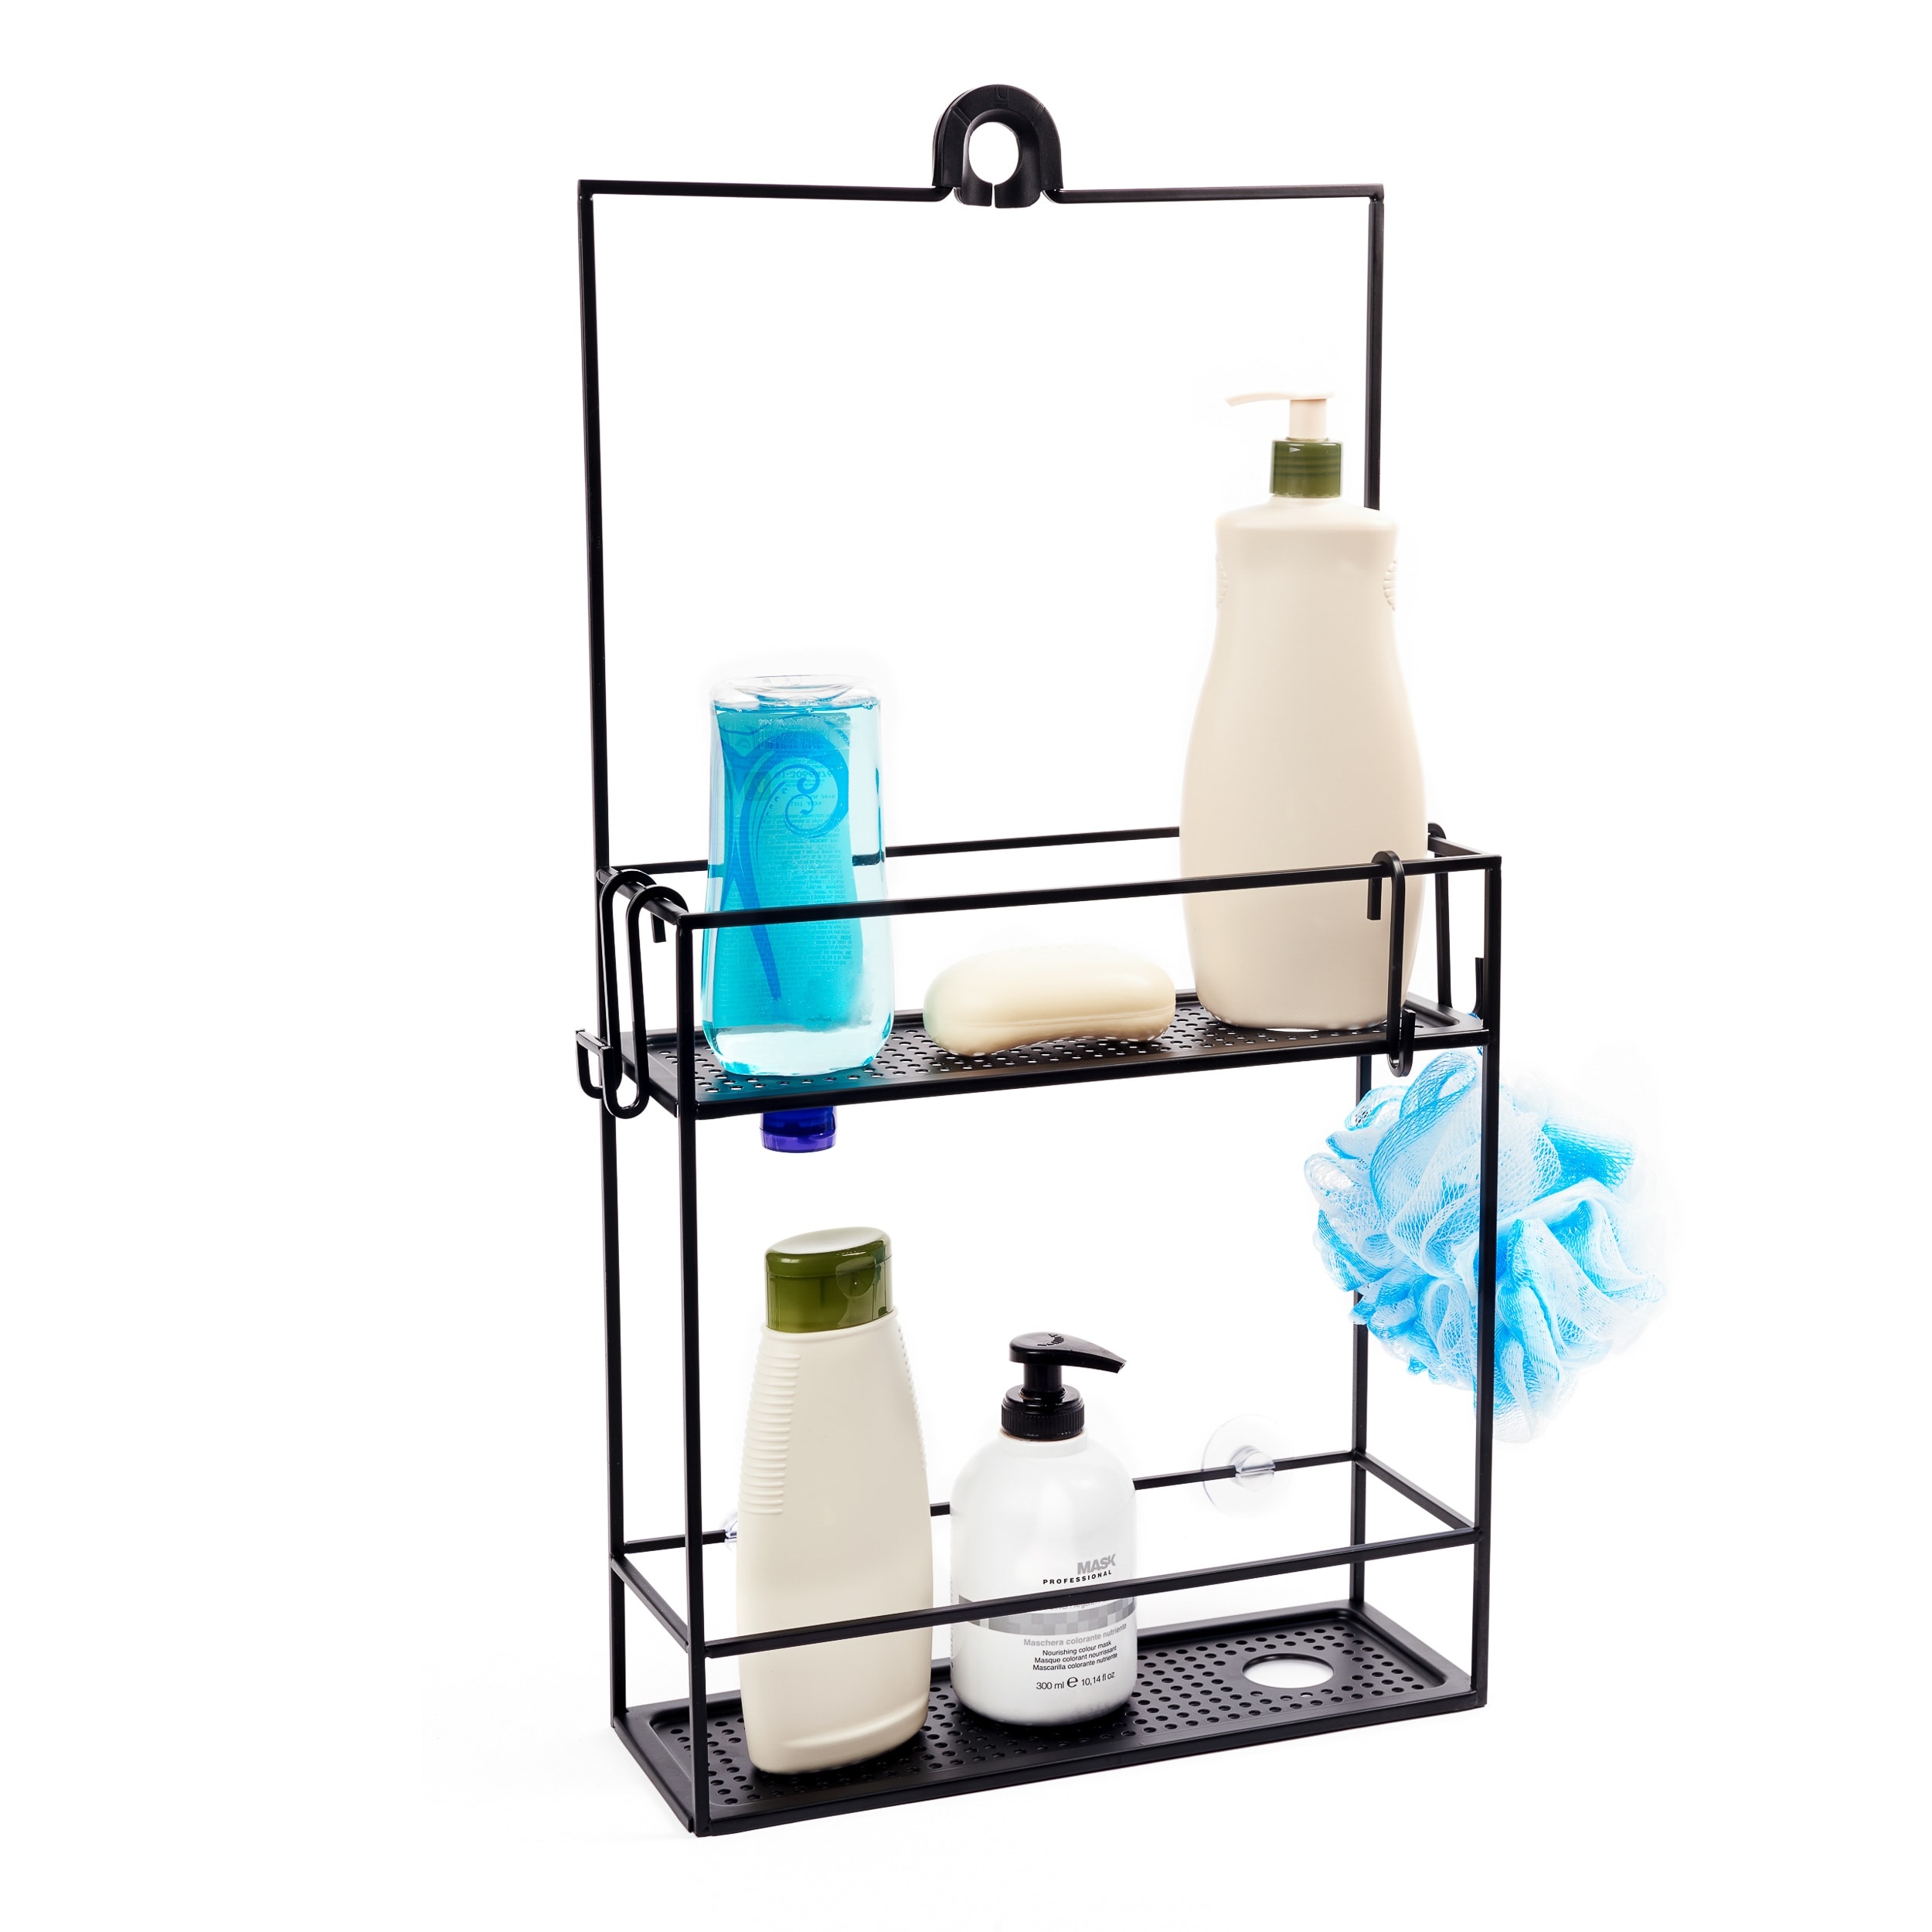 Bask shower caddy by Umbra. This should work great in our clawfoot tub  since it has no walls …